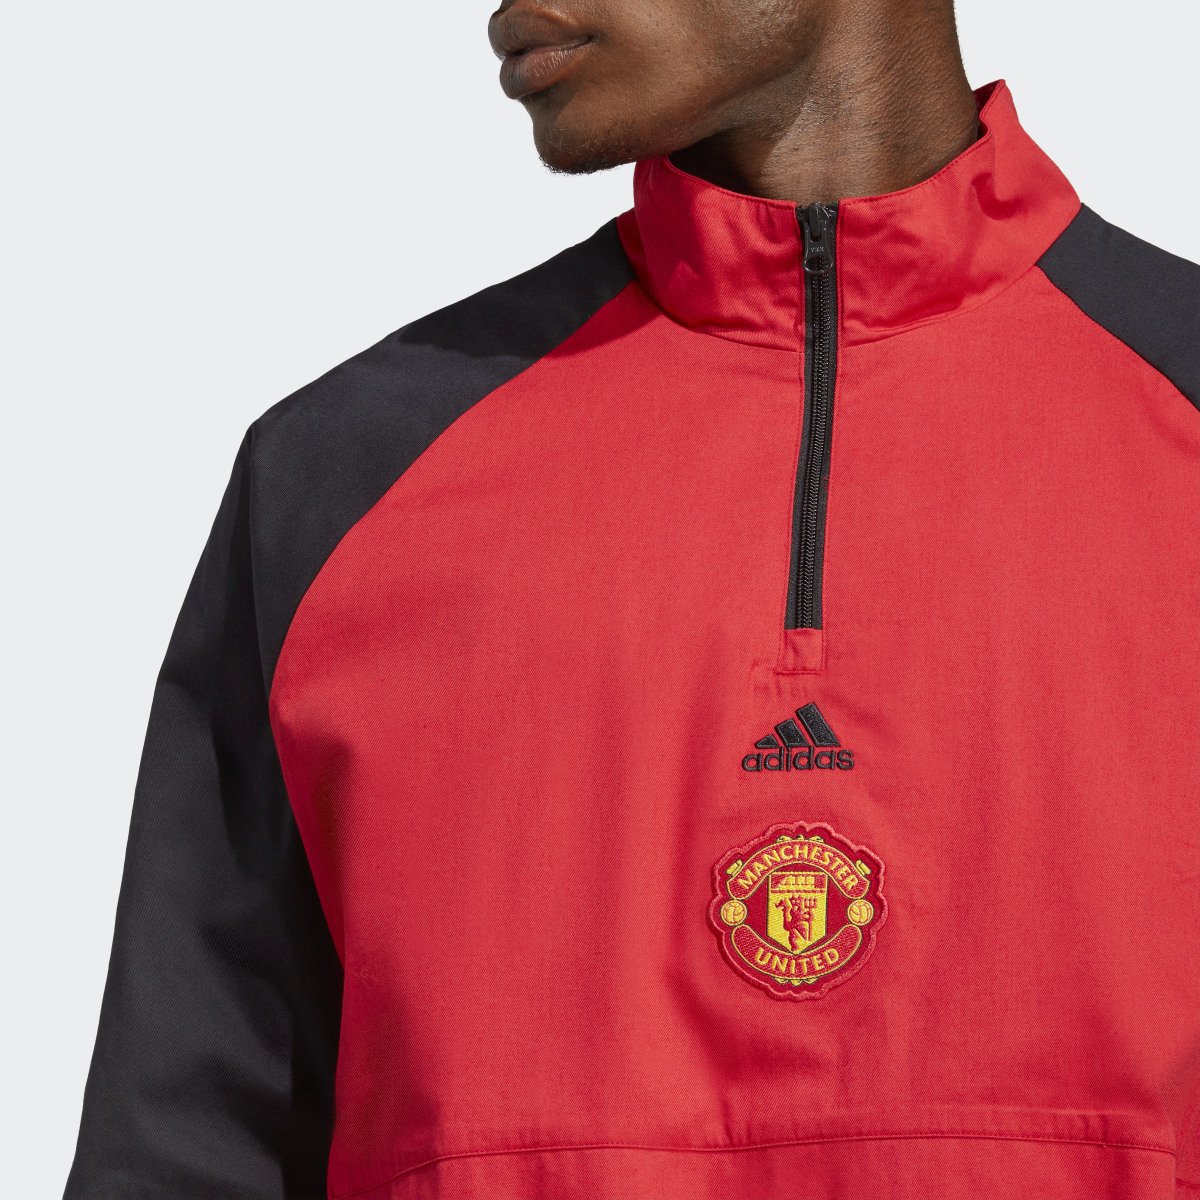 Adidas Manchester United Icon Top. 7